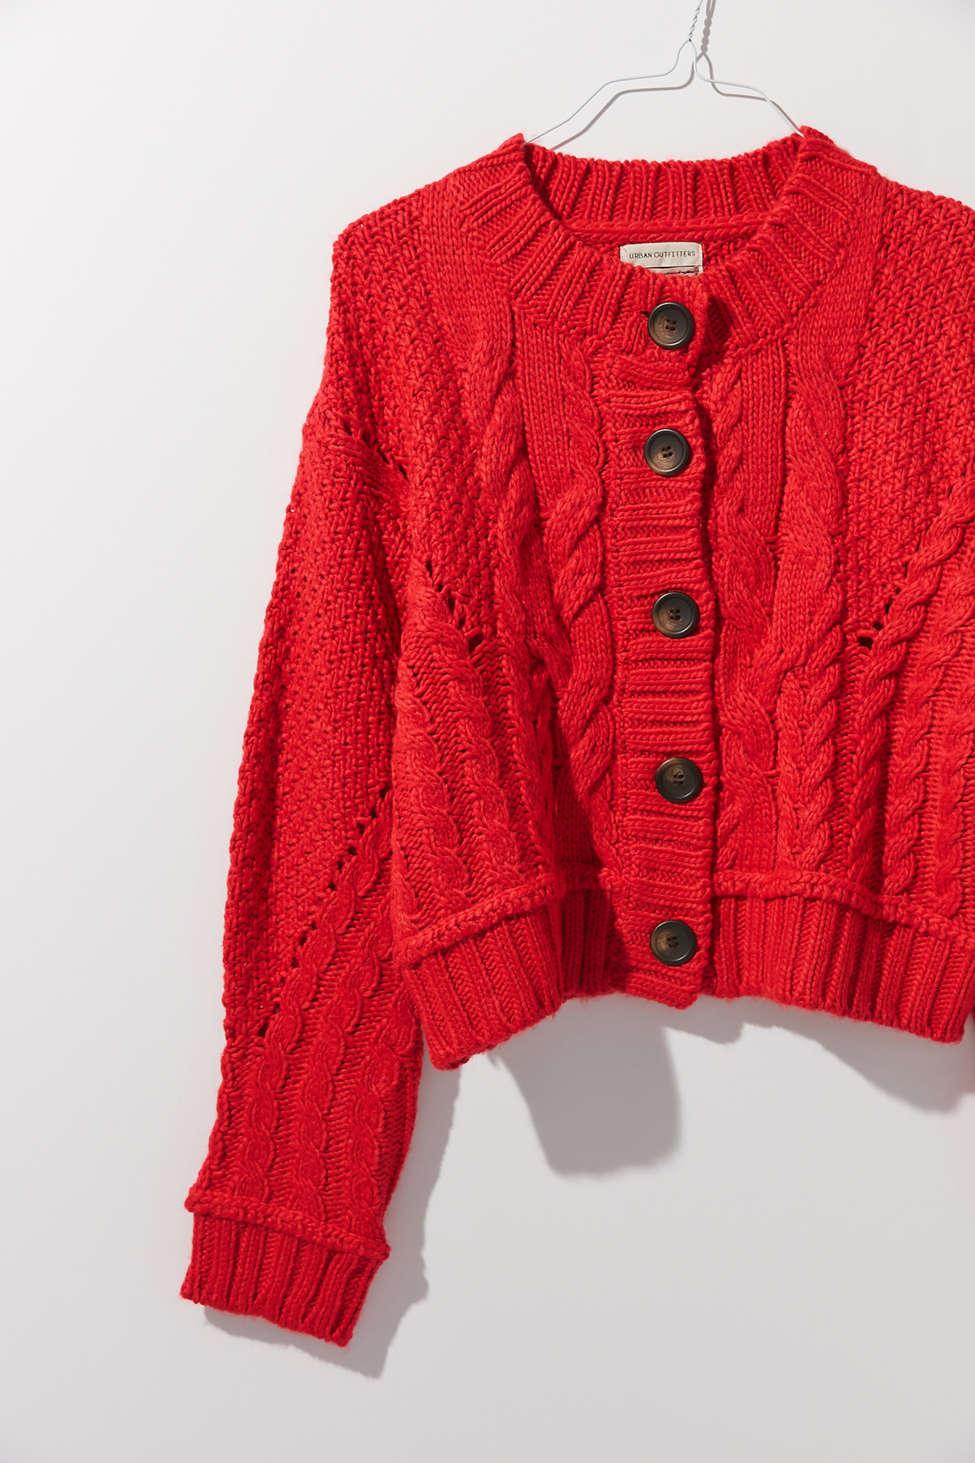 https://cdna.lystit.com/photos/urbanoutfitters/2ecb7bba/urban-outfitters-designer-Red-Uo-Monica-Cable-Knit-Cardigan.jpeg